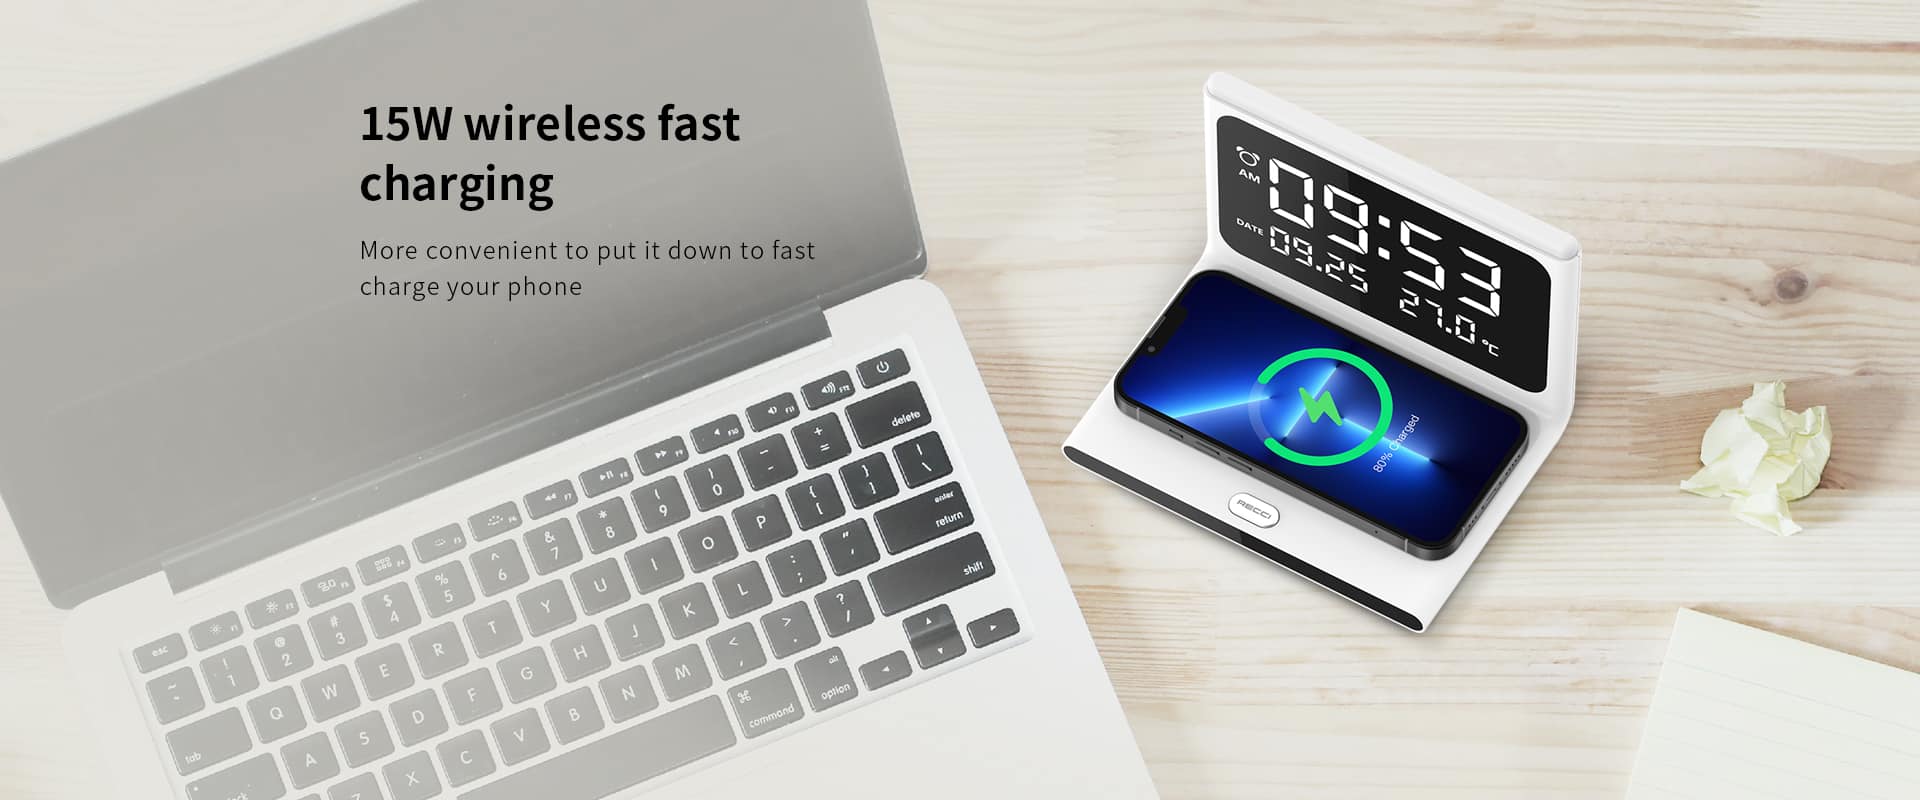 RECCI RLS L12 Perpetual Calendar with 15W Wireless Charger 7